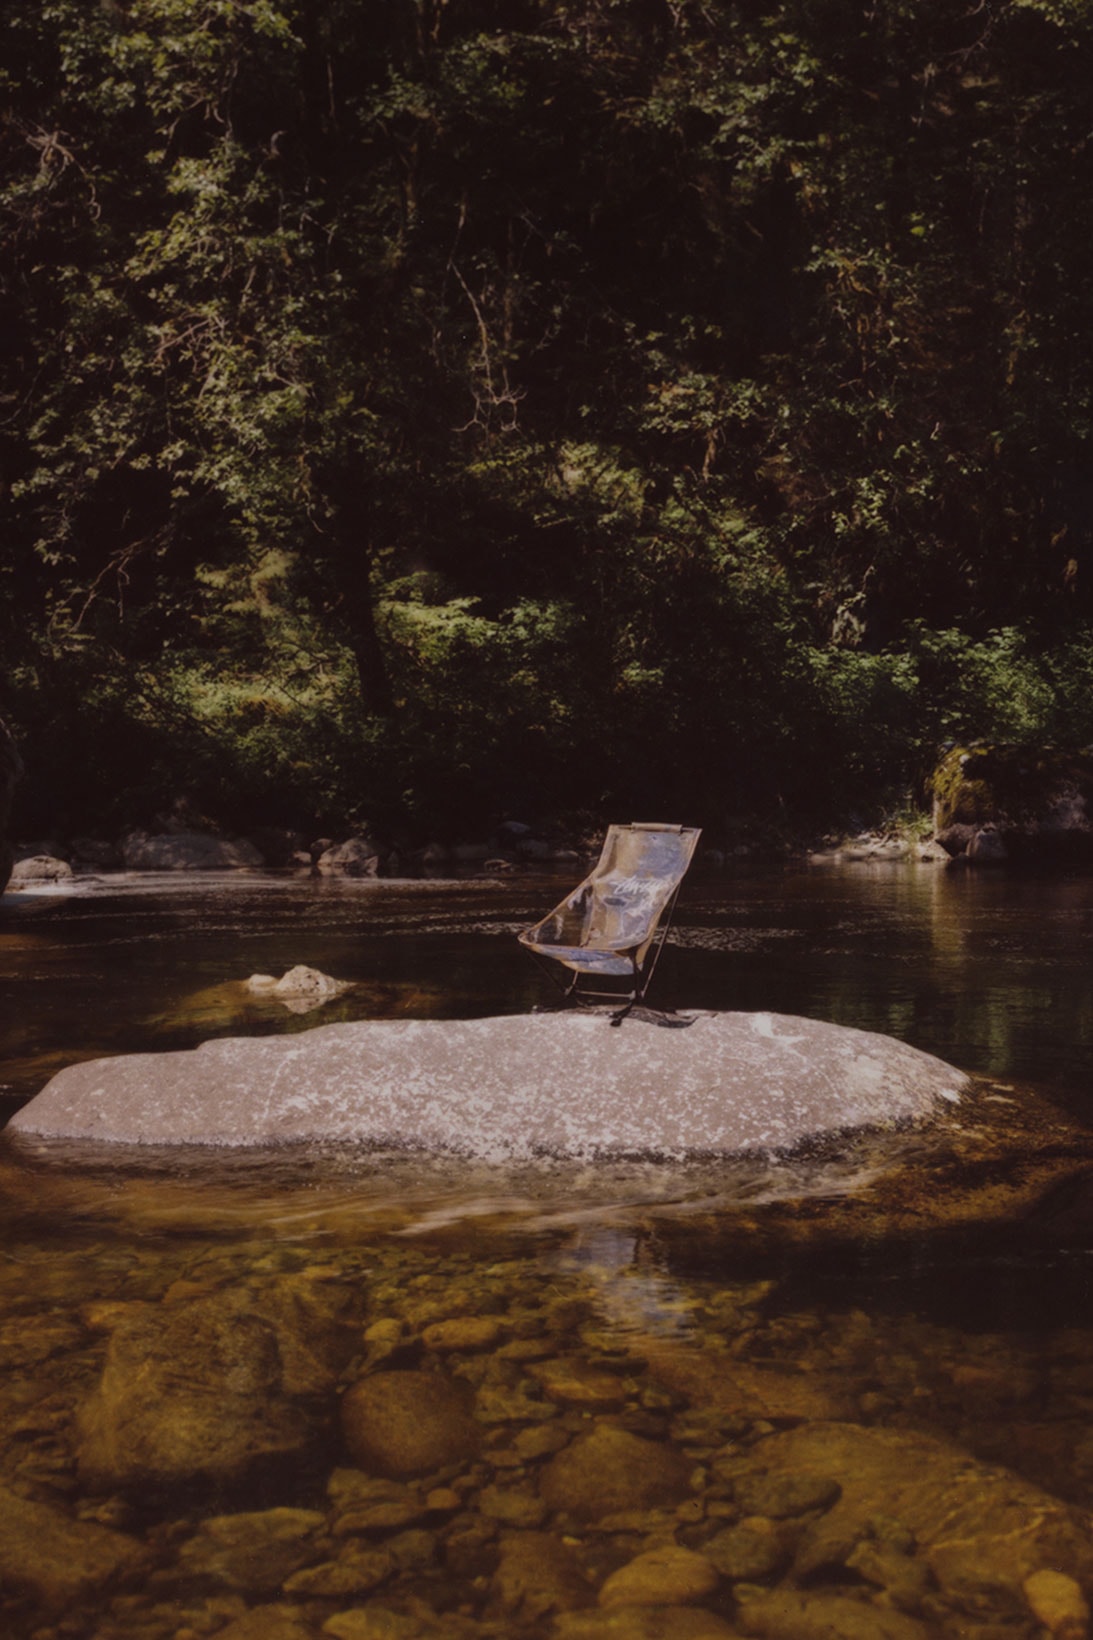 stussy helinox collaboration camping outdoor chair river